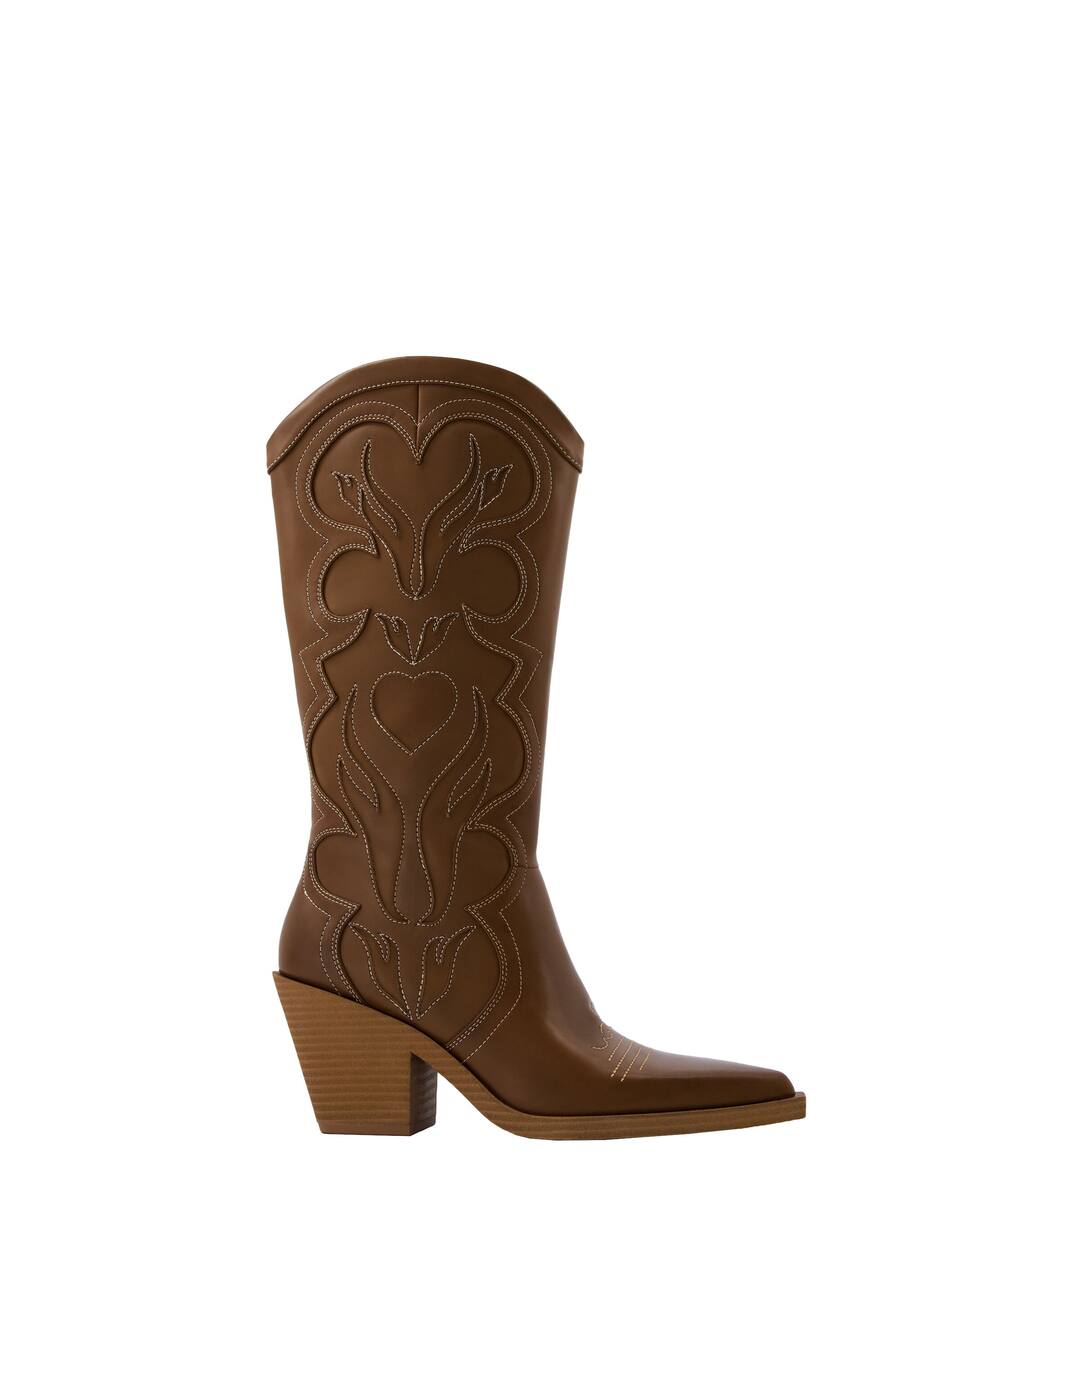 Embroidered high-heel cowboy boots